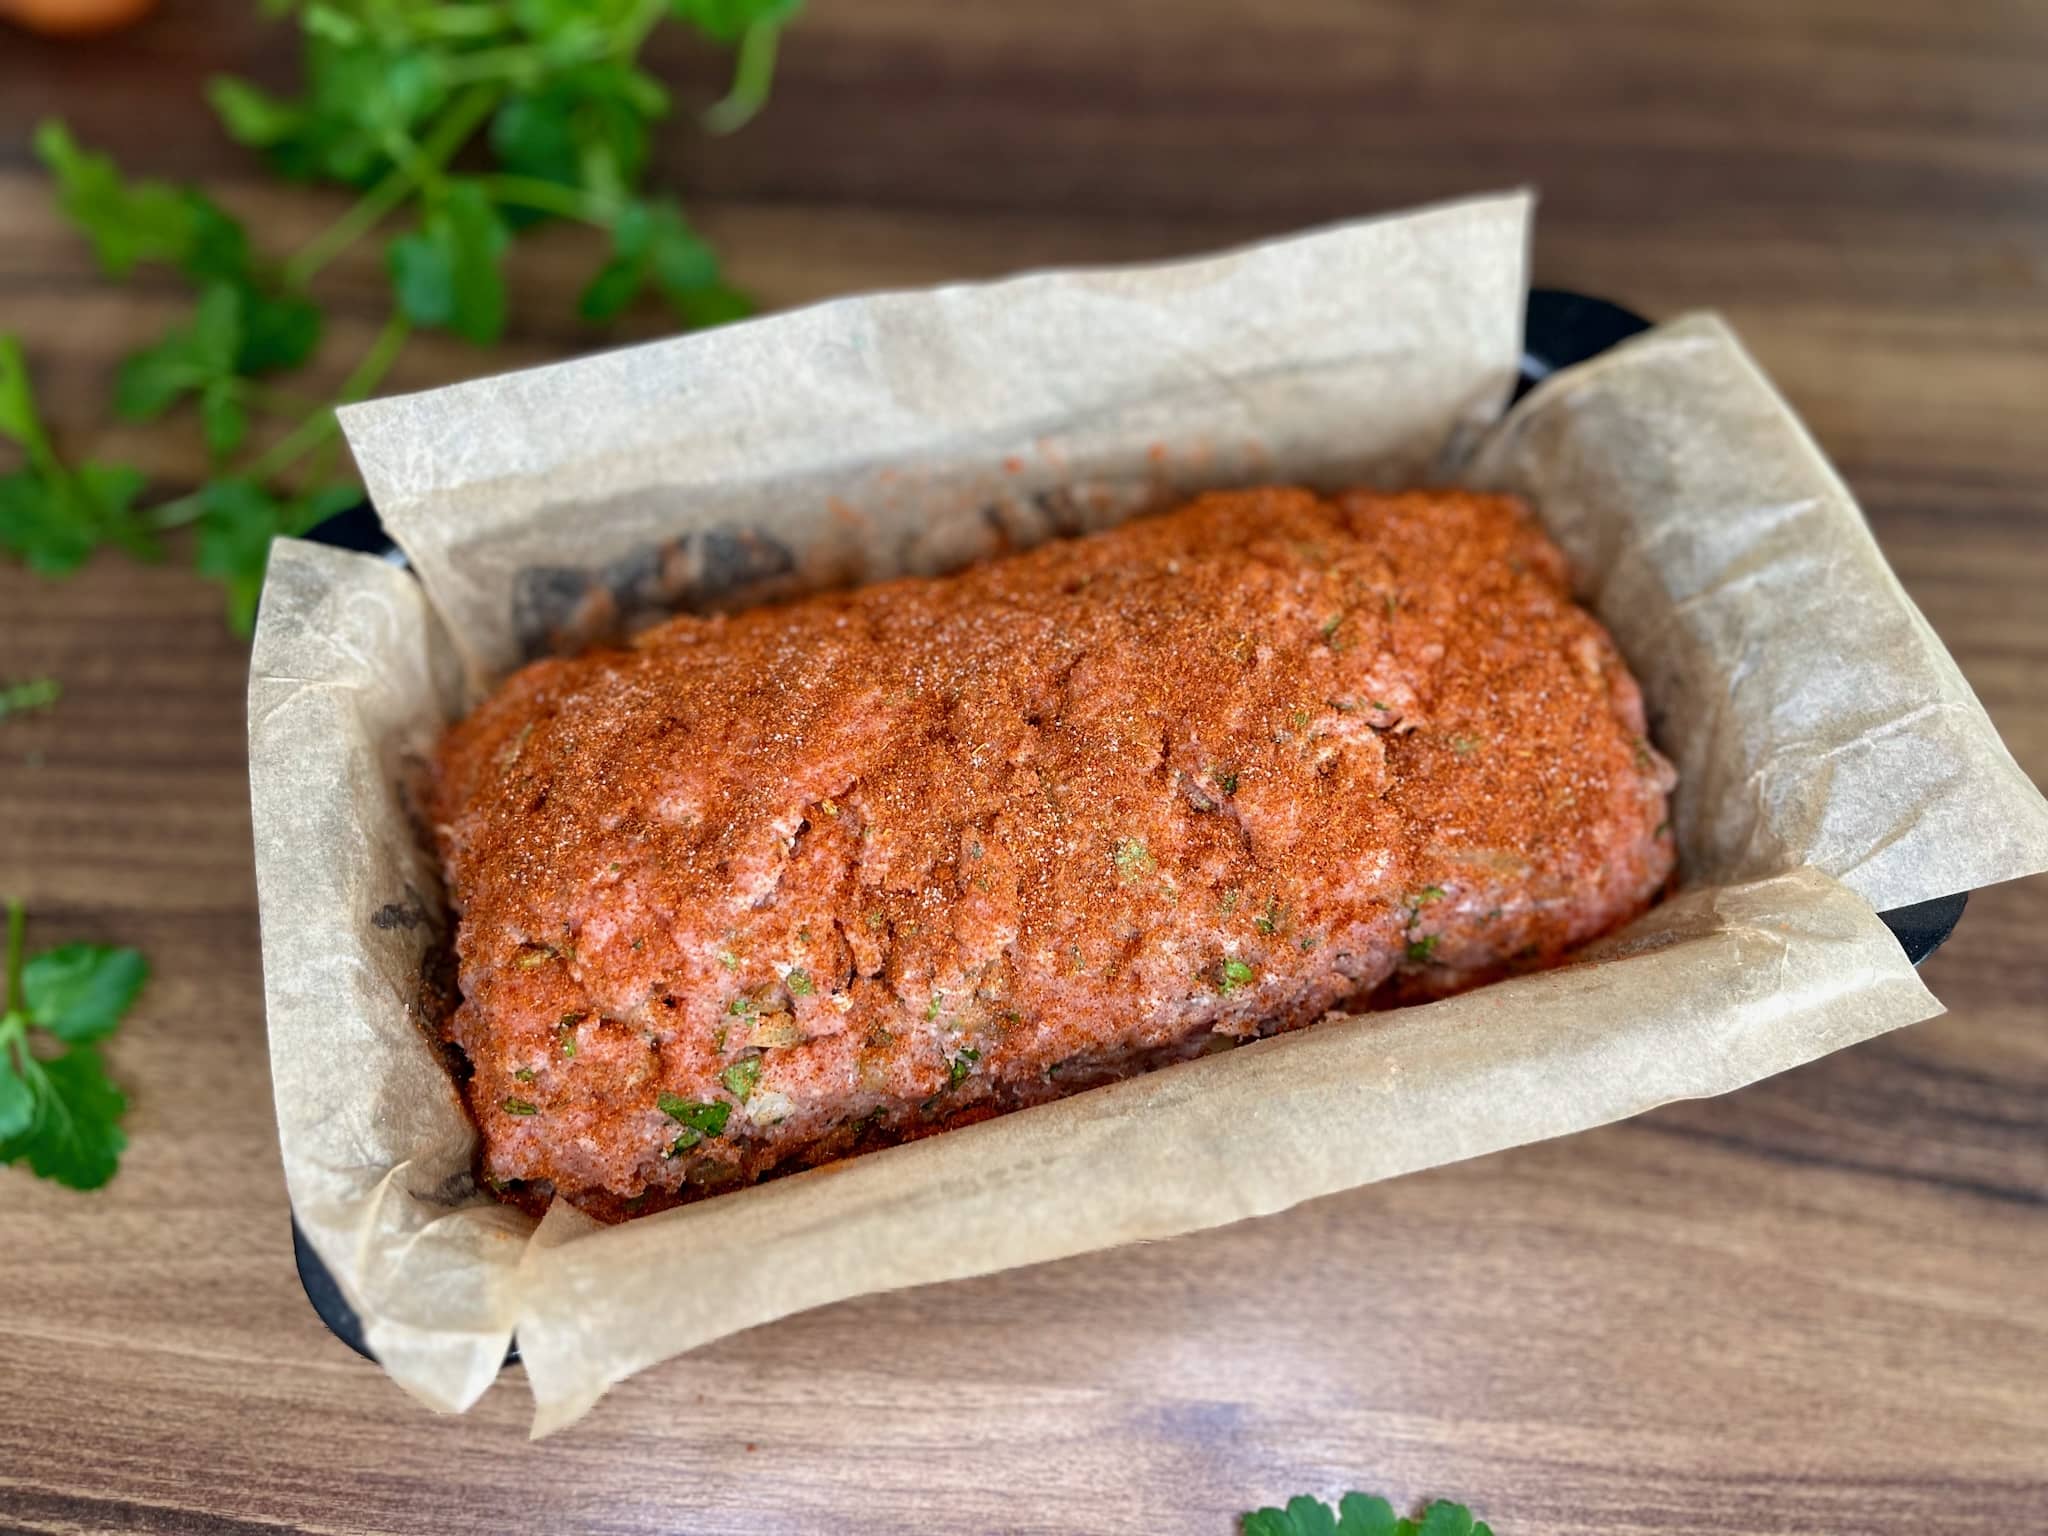 Meatloaf in a tin dusted with paprika ready for baking